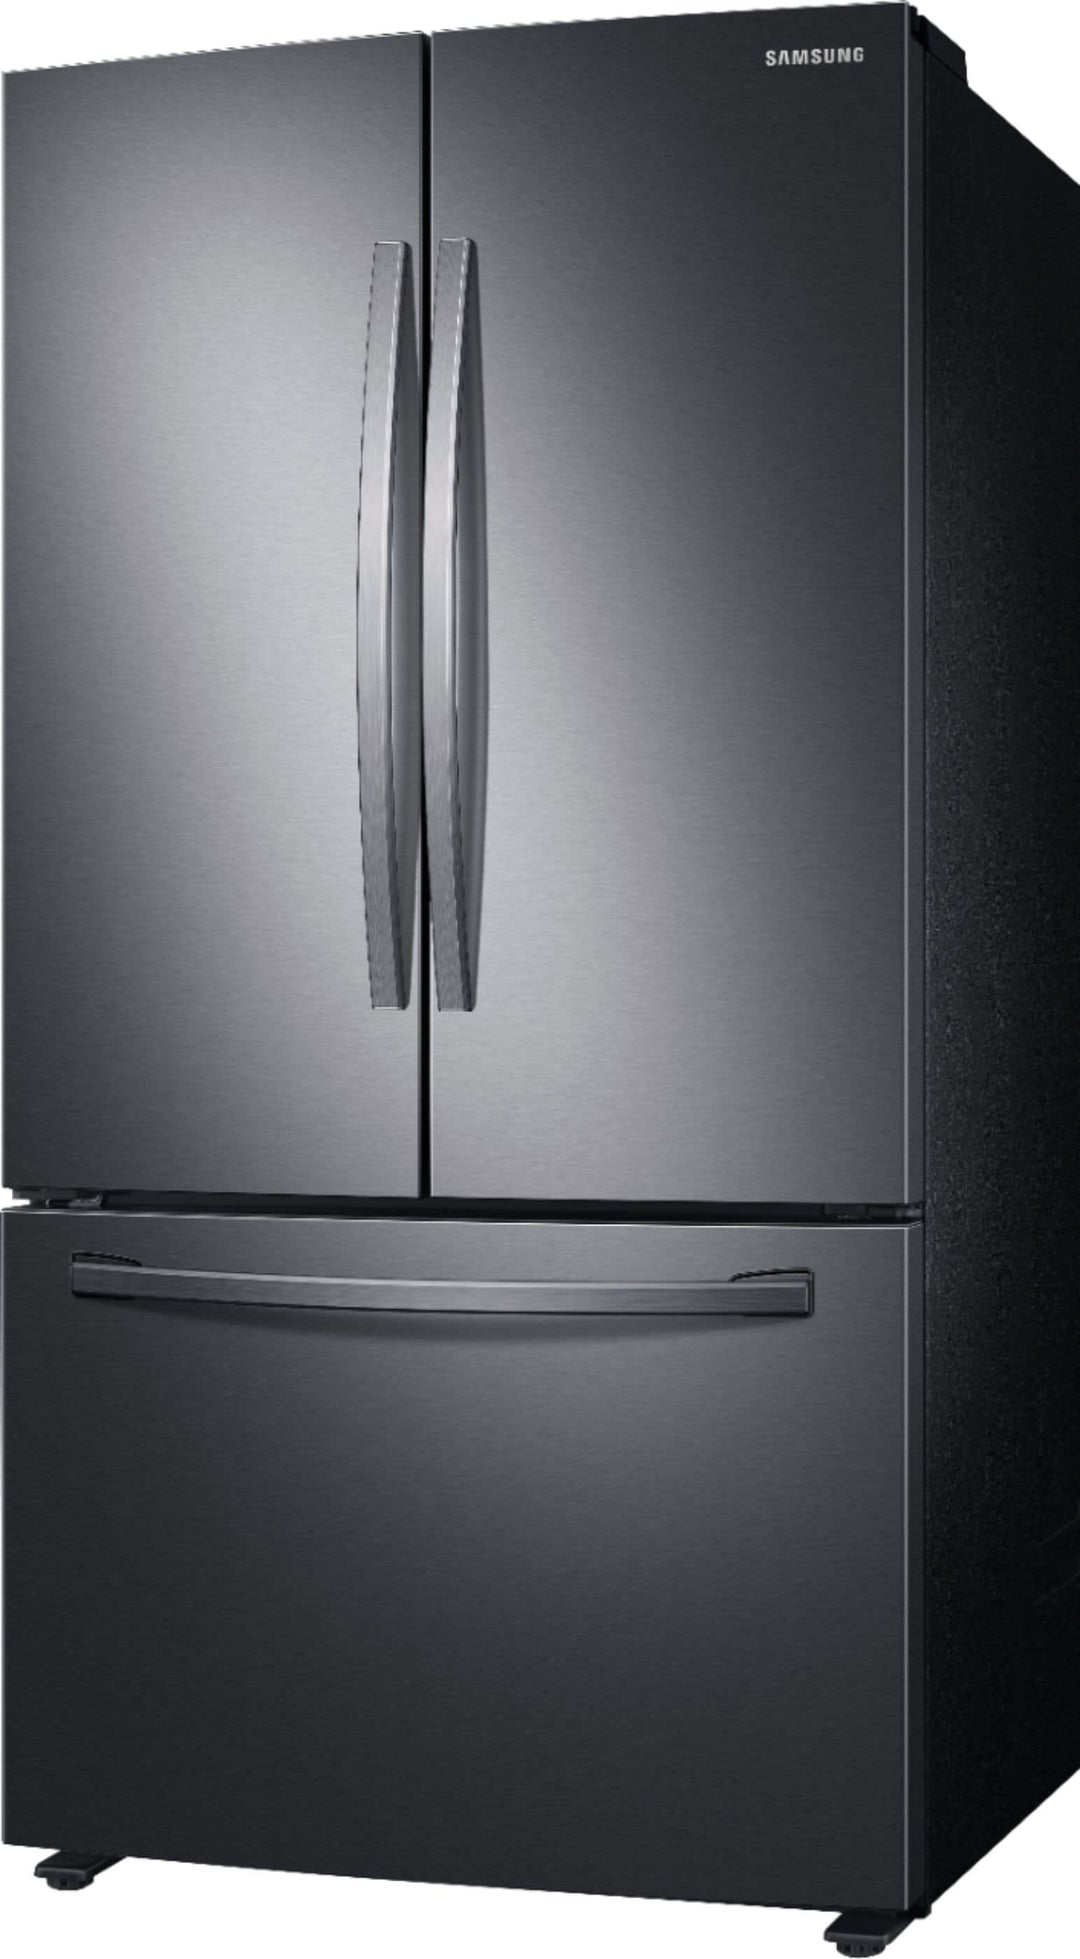 Samsung - 28 cu. ft. Large Capacity 3-Door French Door Refrigerator with AutoFill Water Pitcher - Black stainless steel_4